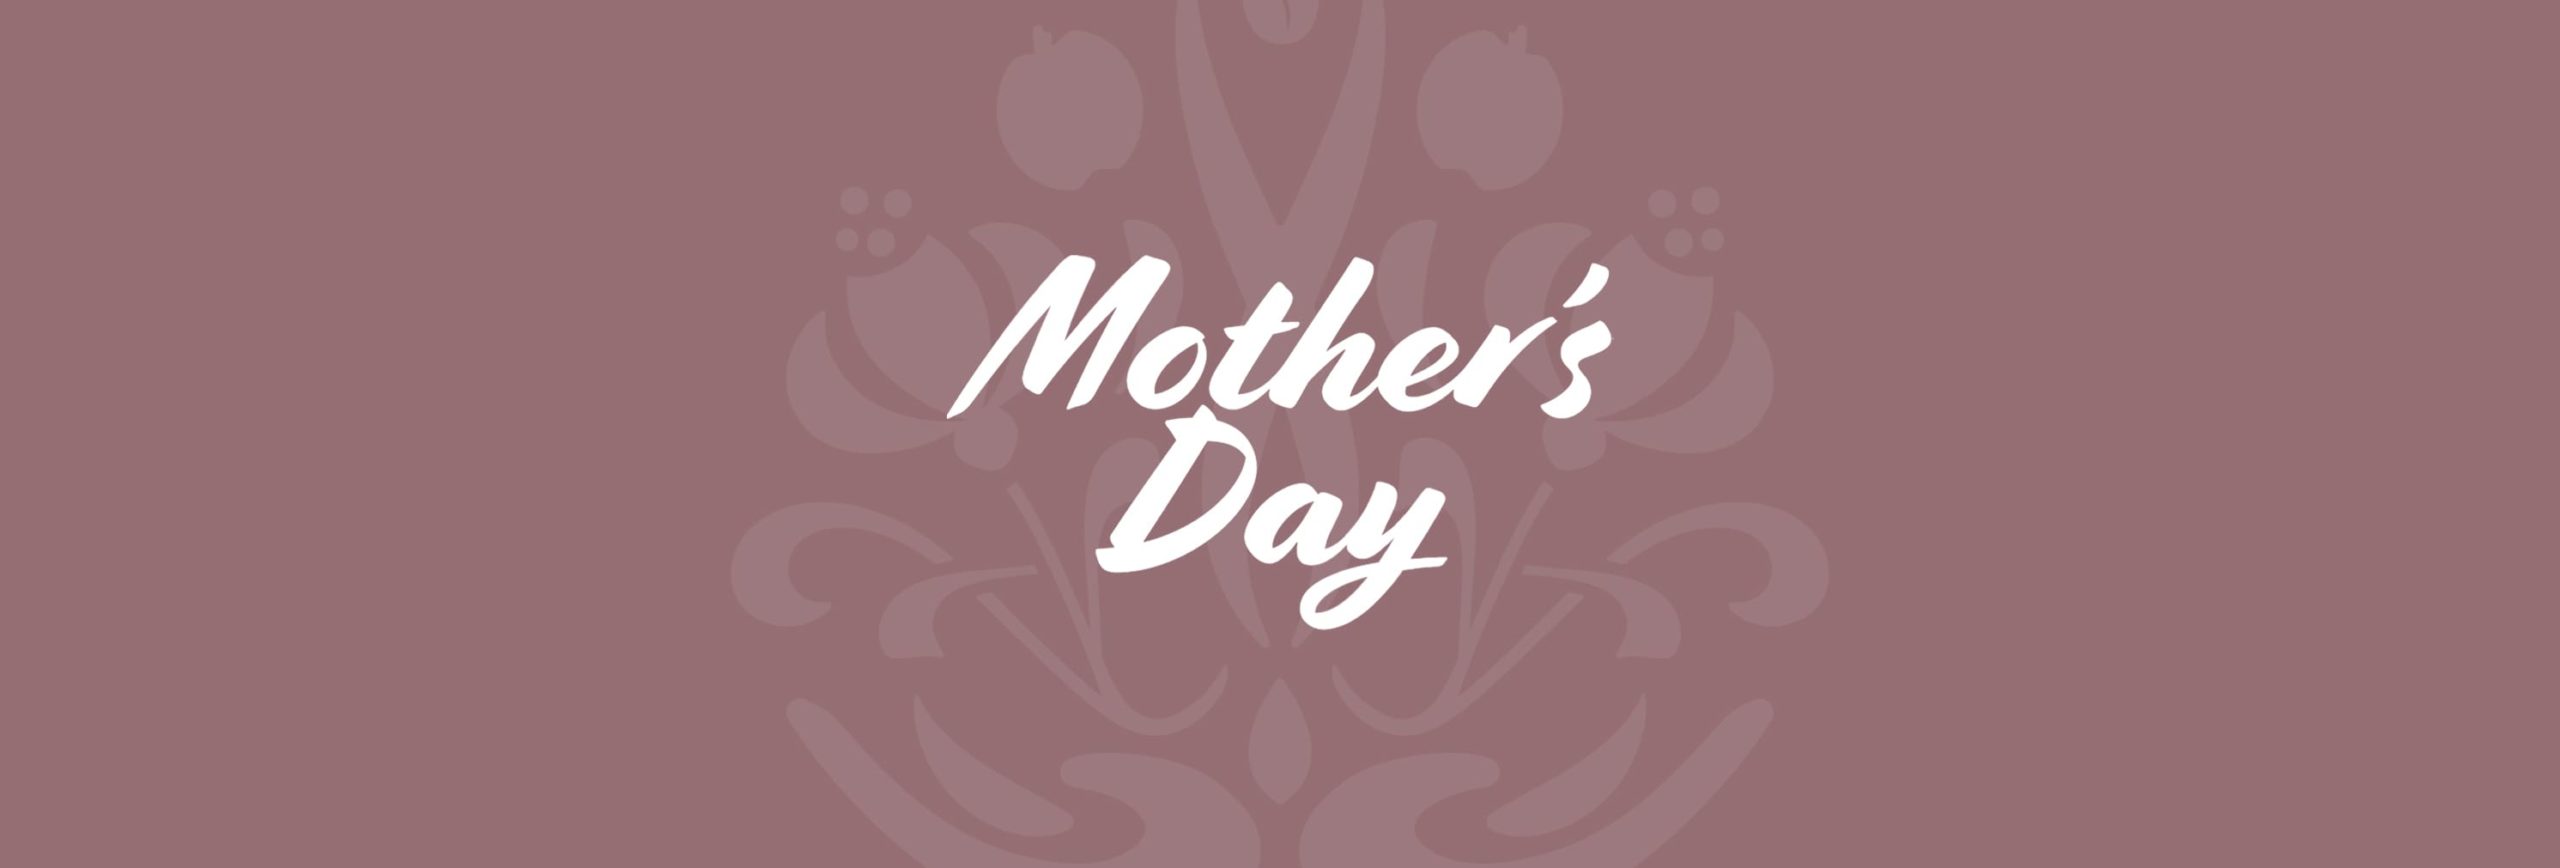 Mother’s Day Weekend Information